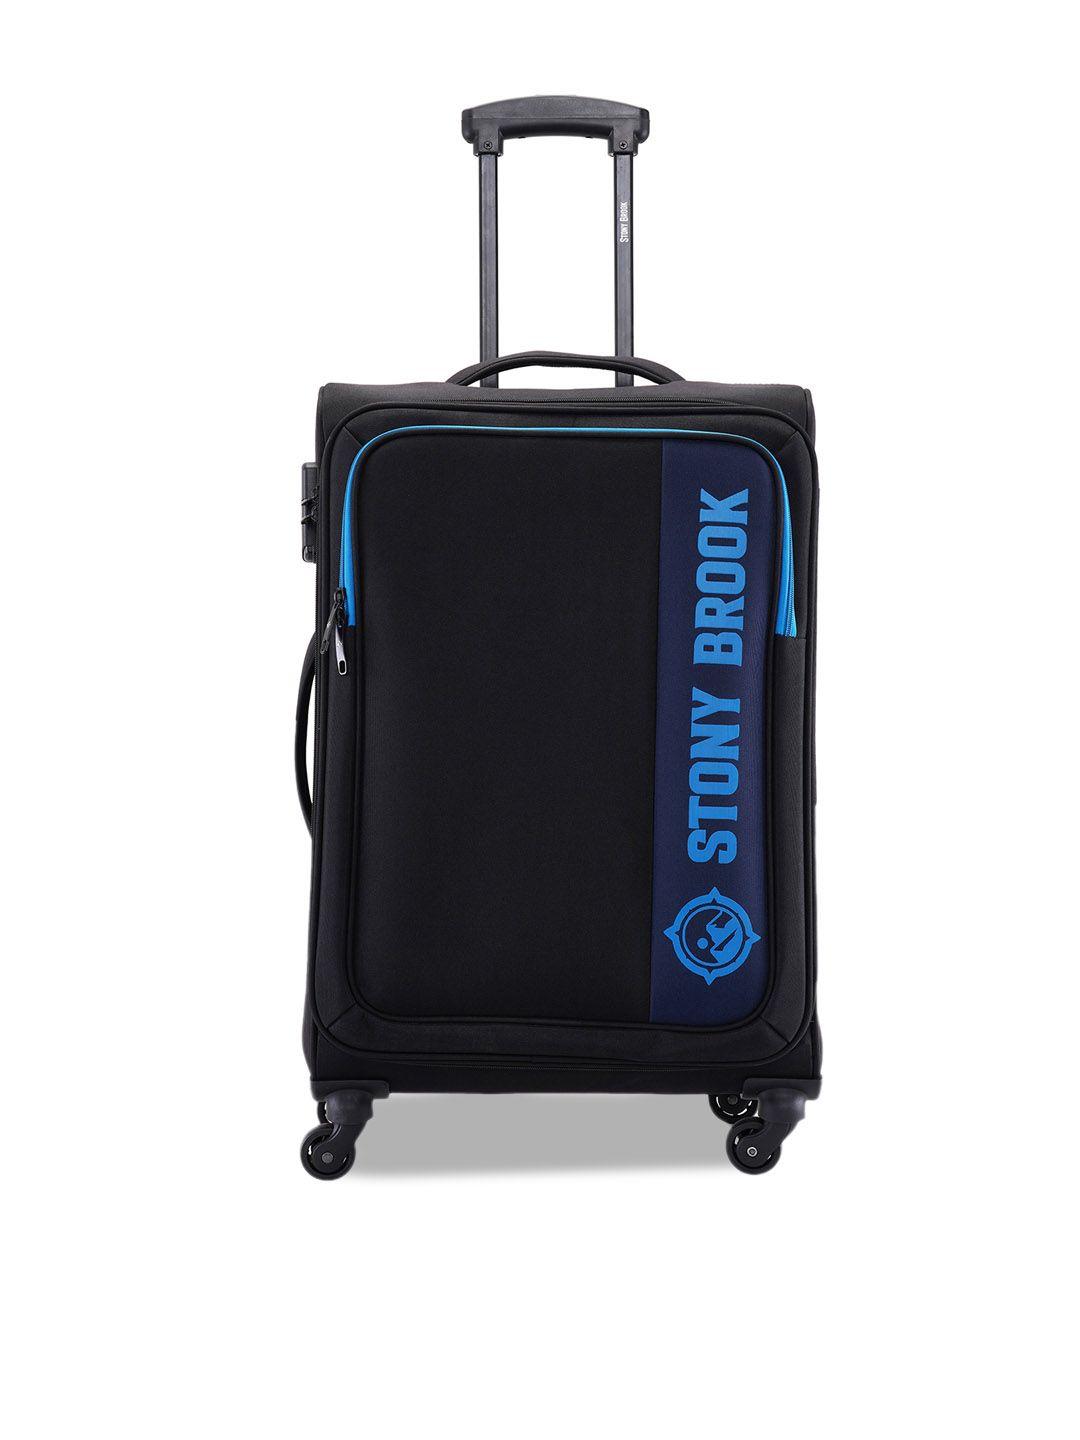 stony brook by nasher miles soft-sided medium trolley suitcase